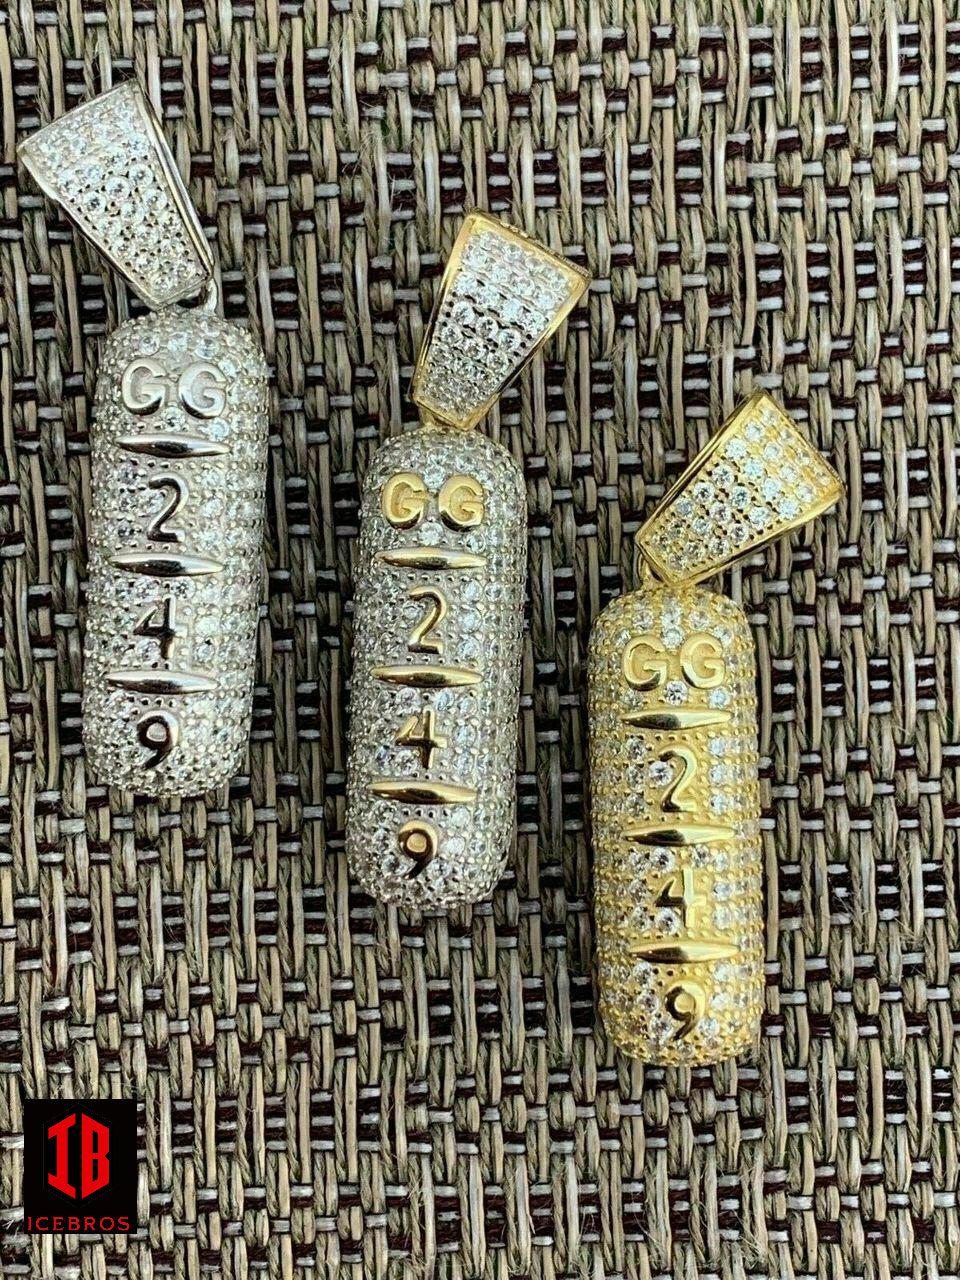 925 Silver 14k Gold Plated Zanny Pill Bar Pendant Necklace Lil Xan GG 249